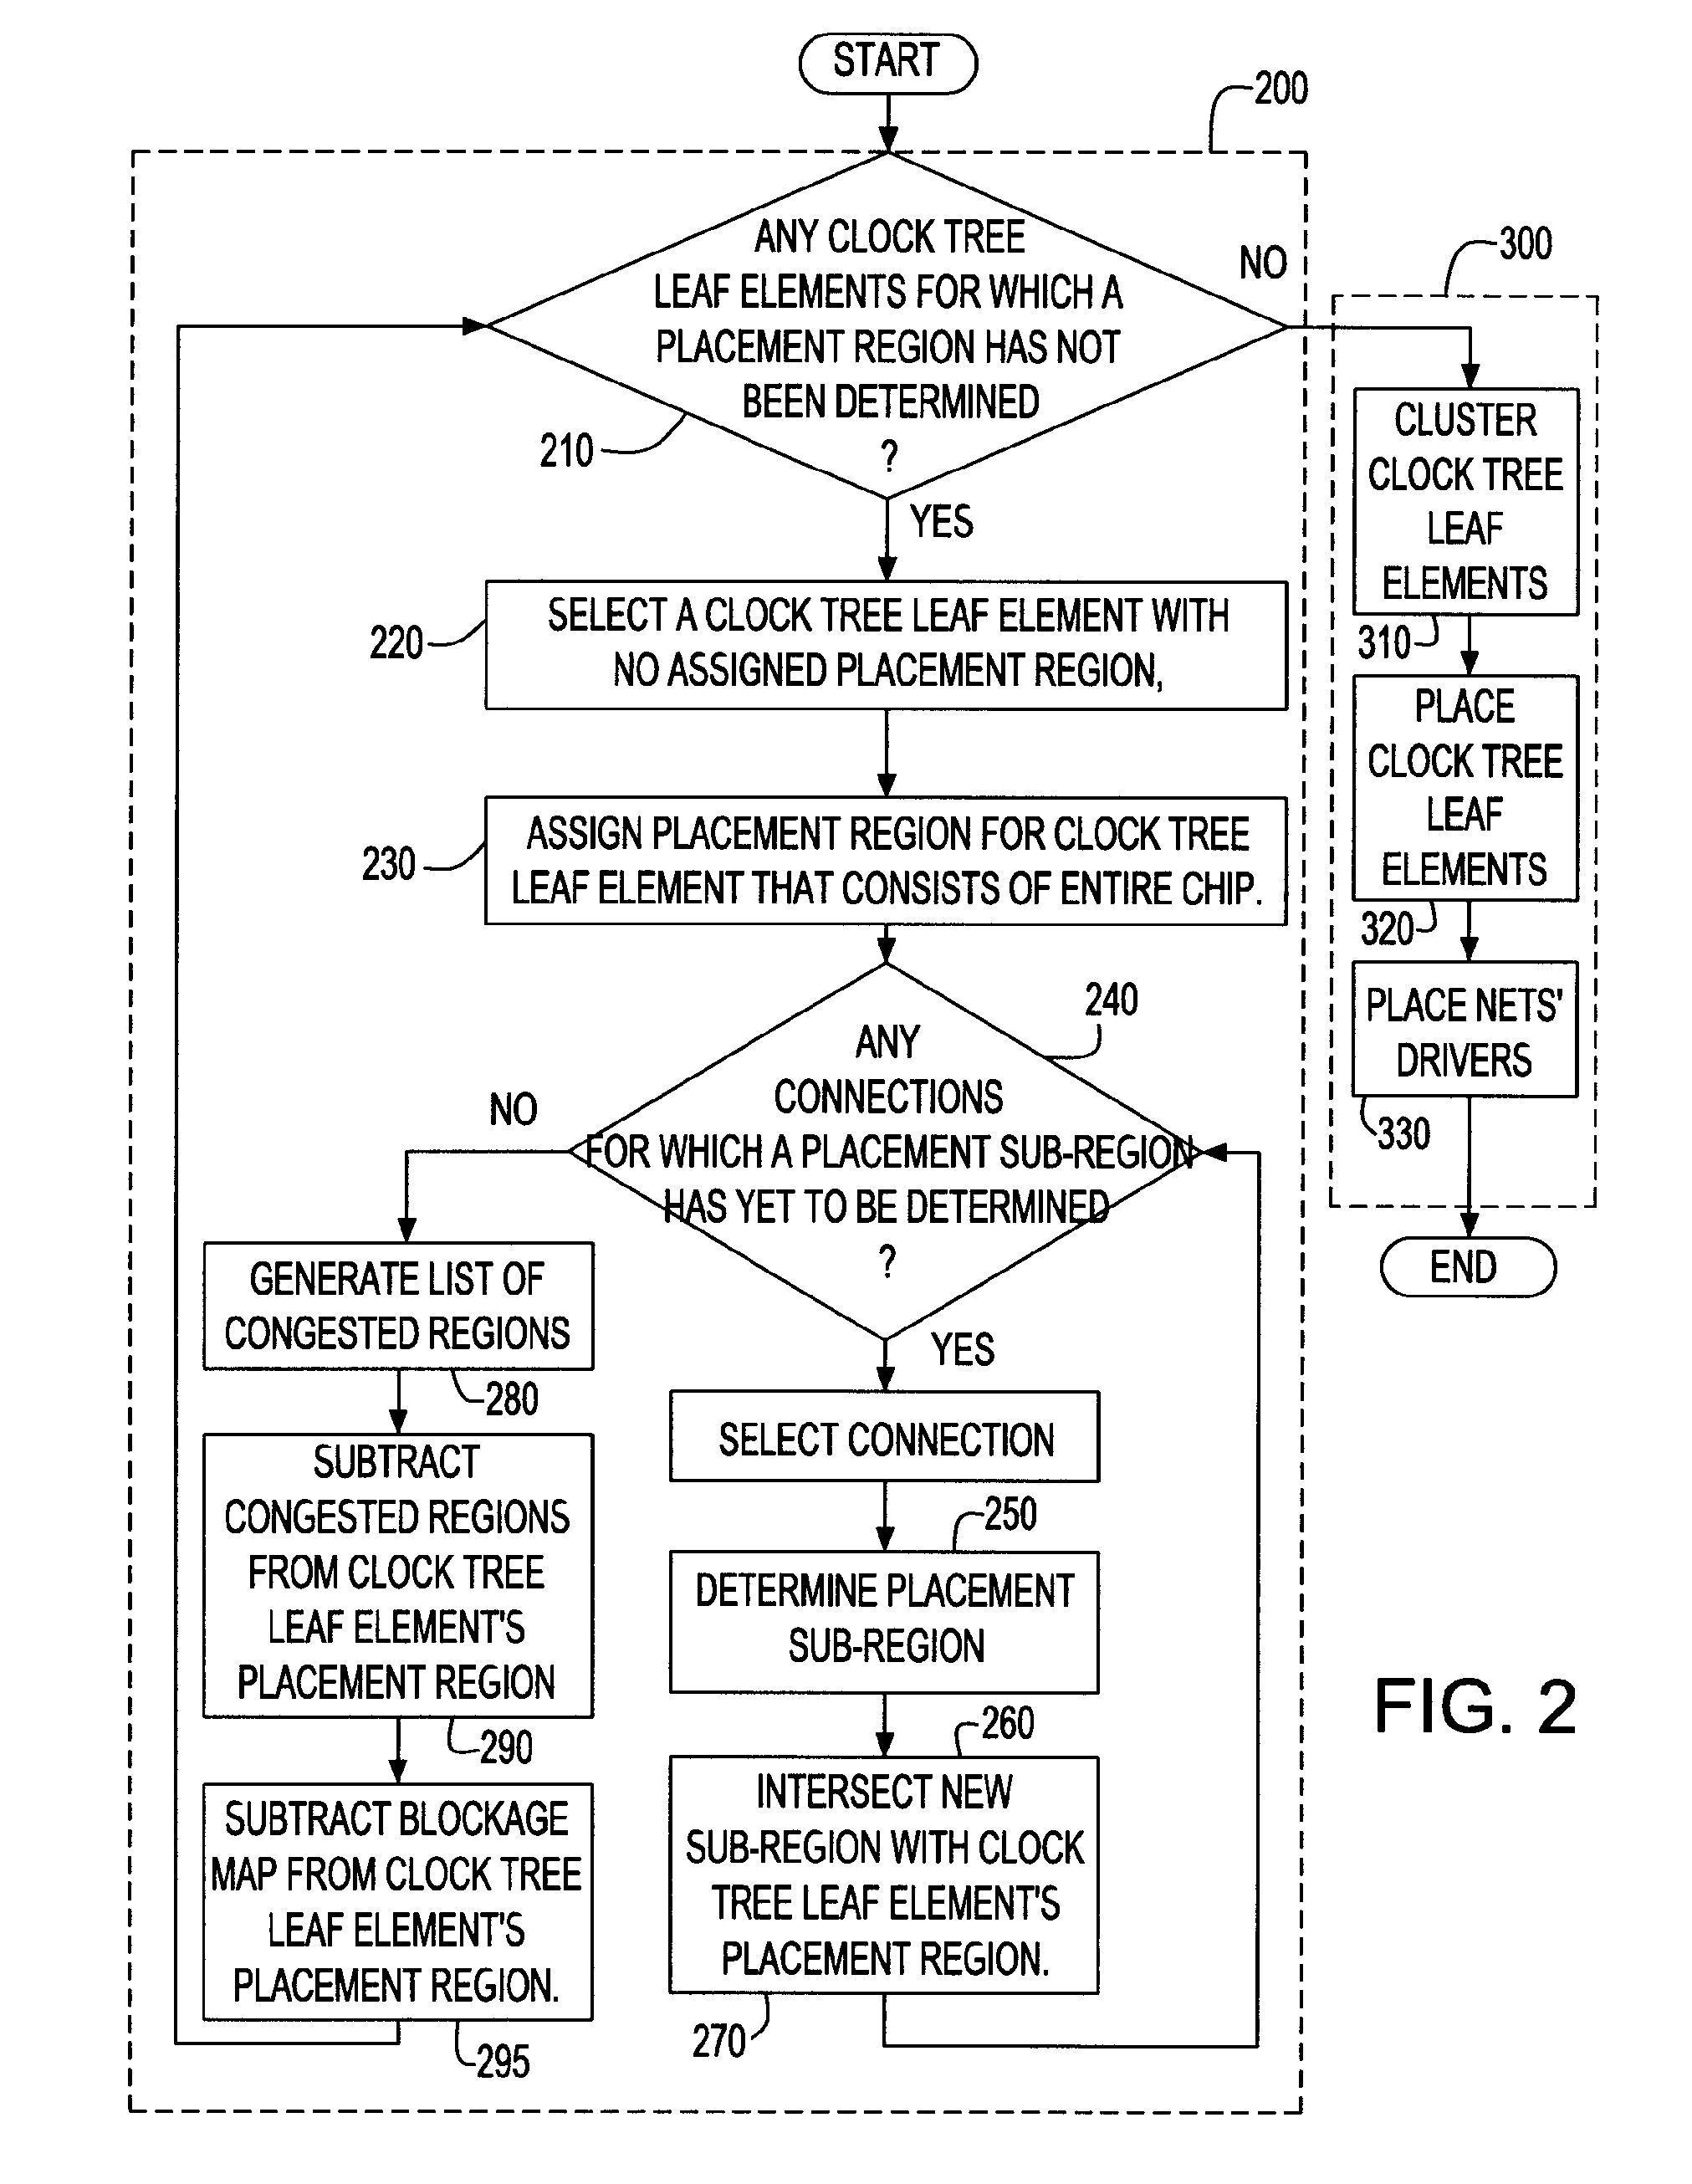 Clock tree distribution generation by determining allowed placement regions for clocked elements